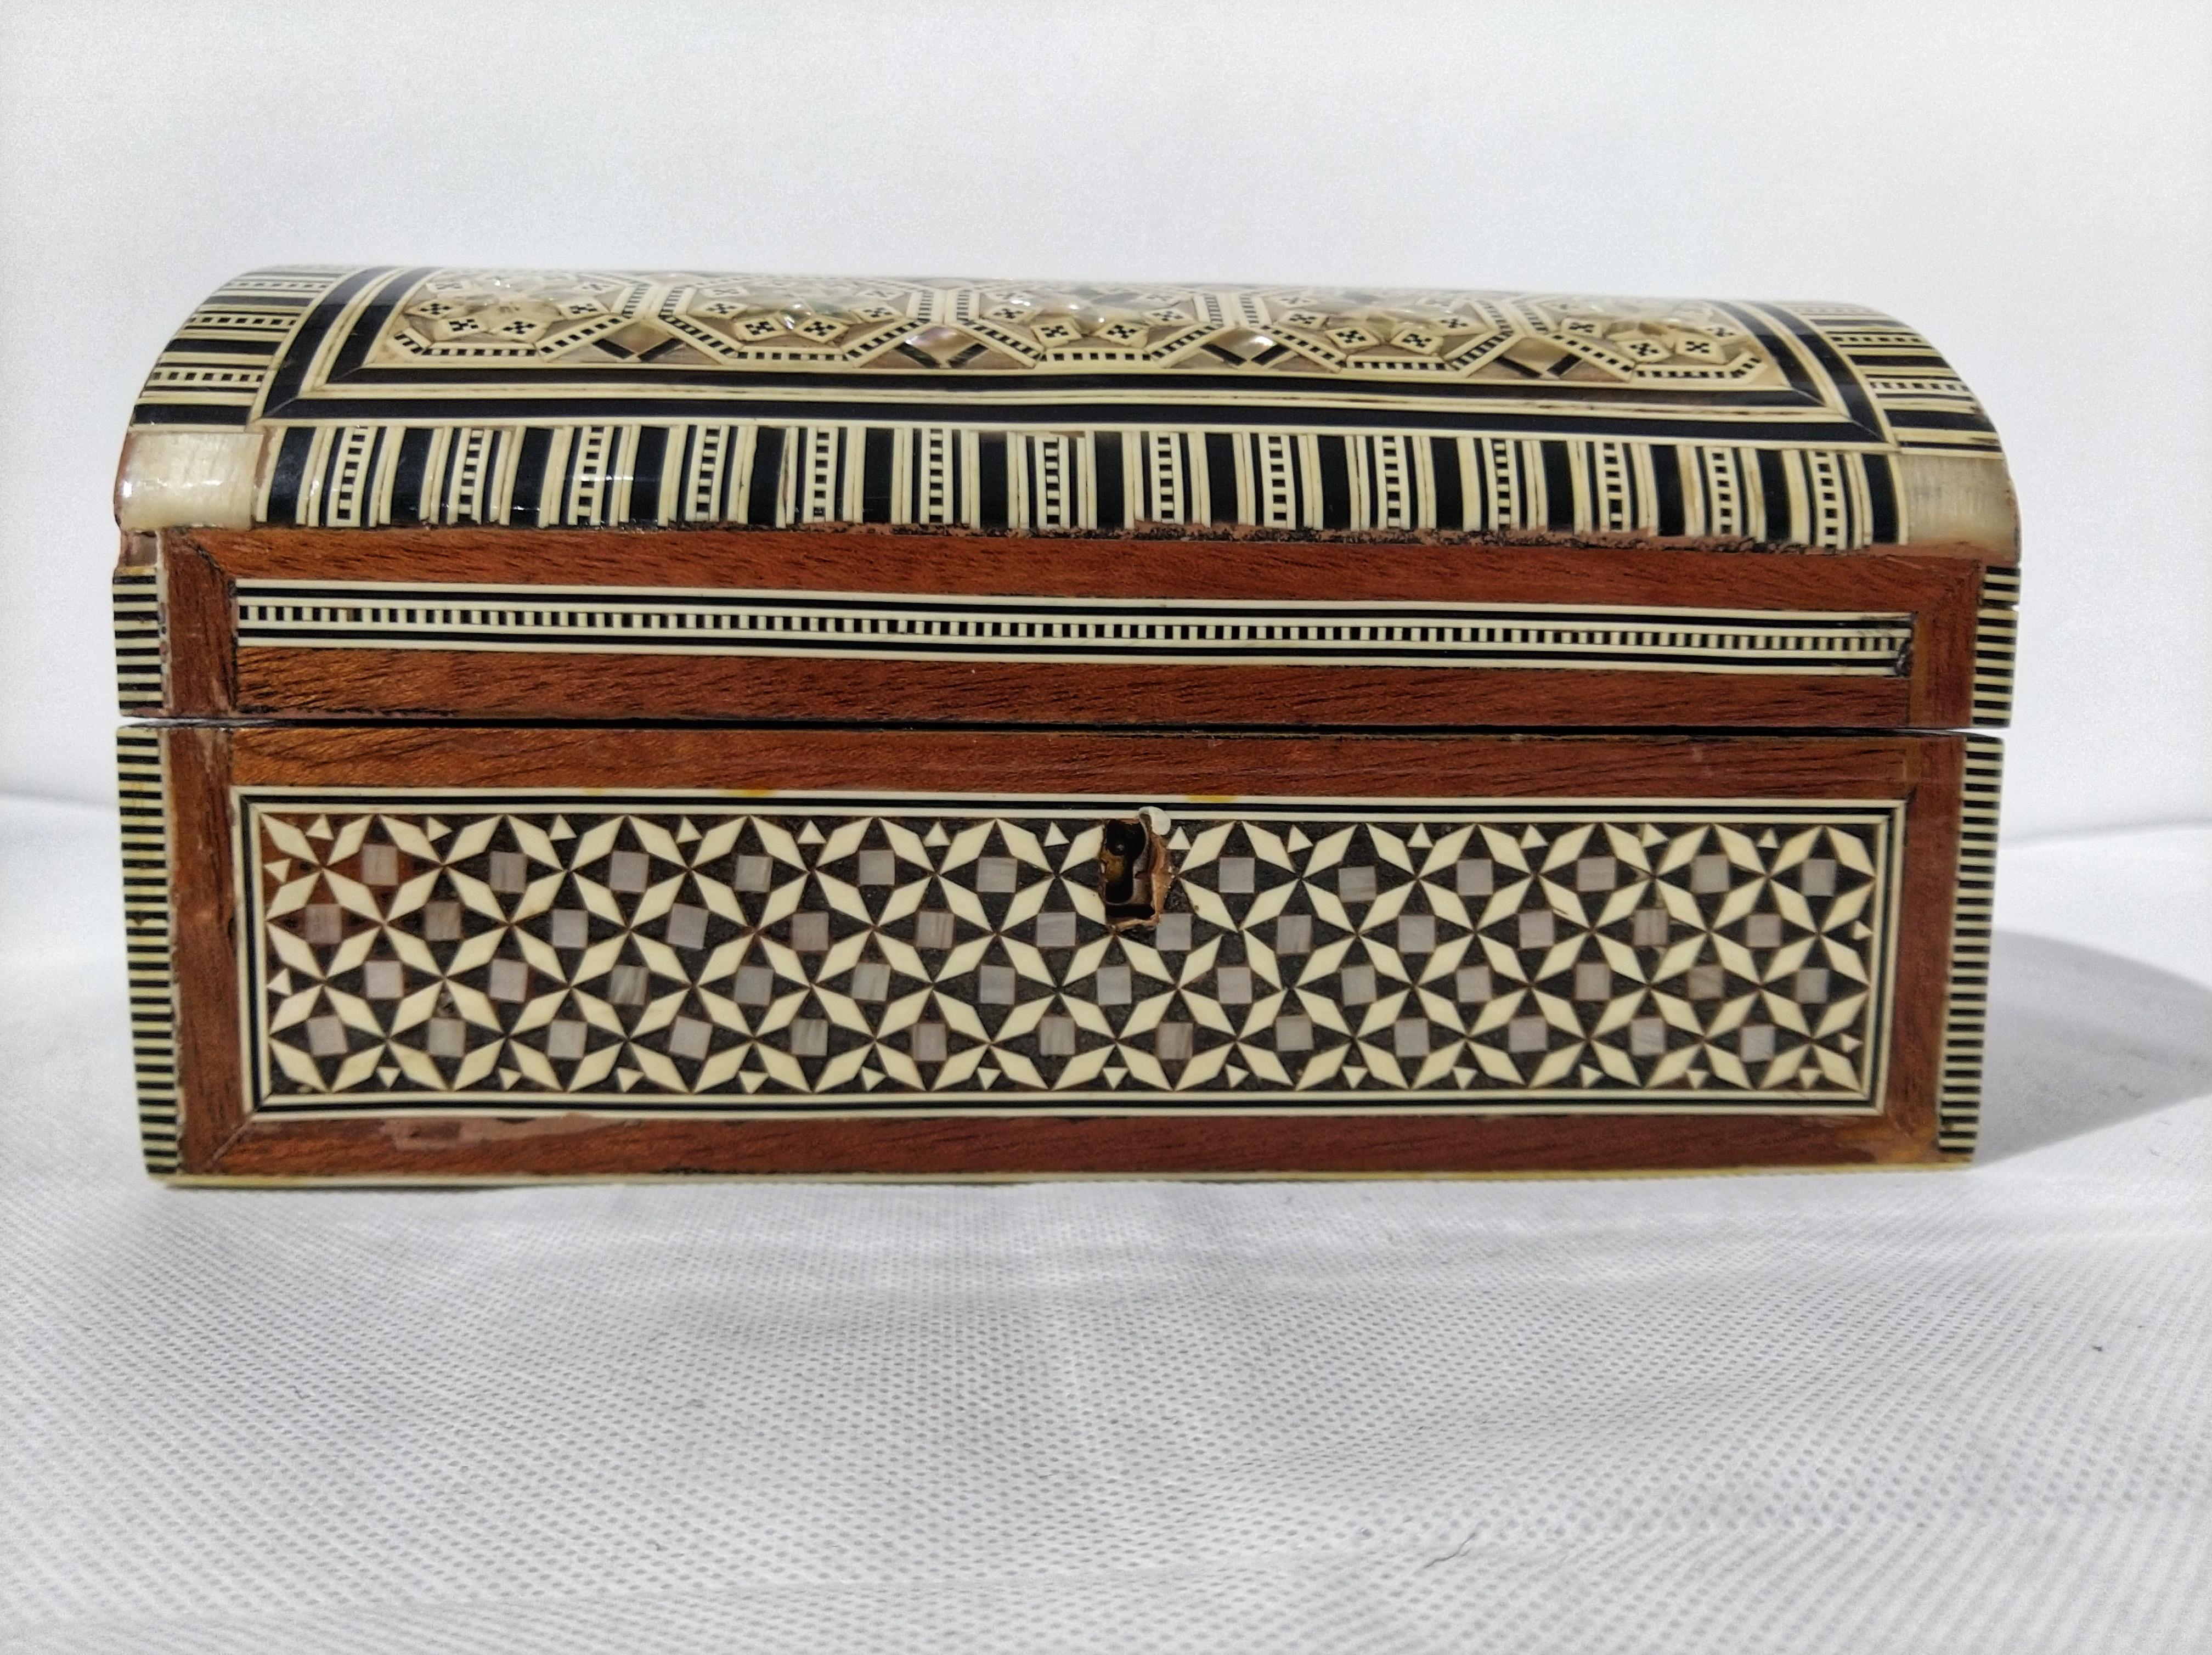 Exquisite handcrafted Middle Eastern Syrian mother of pearl inlaid walnut wood jewelry box.
Large dome jewelry chest intricately decorated with Moorish motif designs which have been painstakingly inlaid with mother of pearl and bone and marquetry